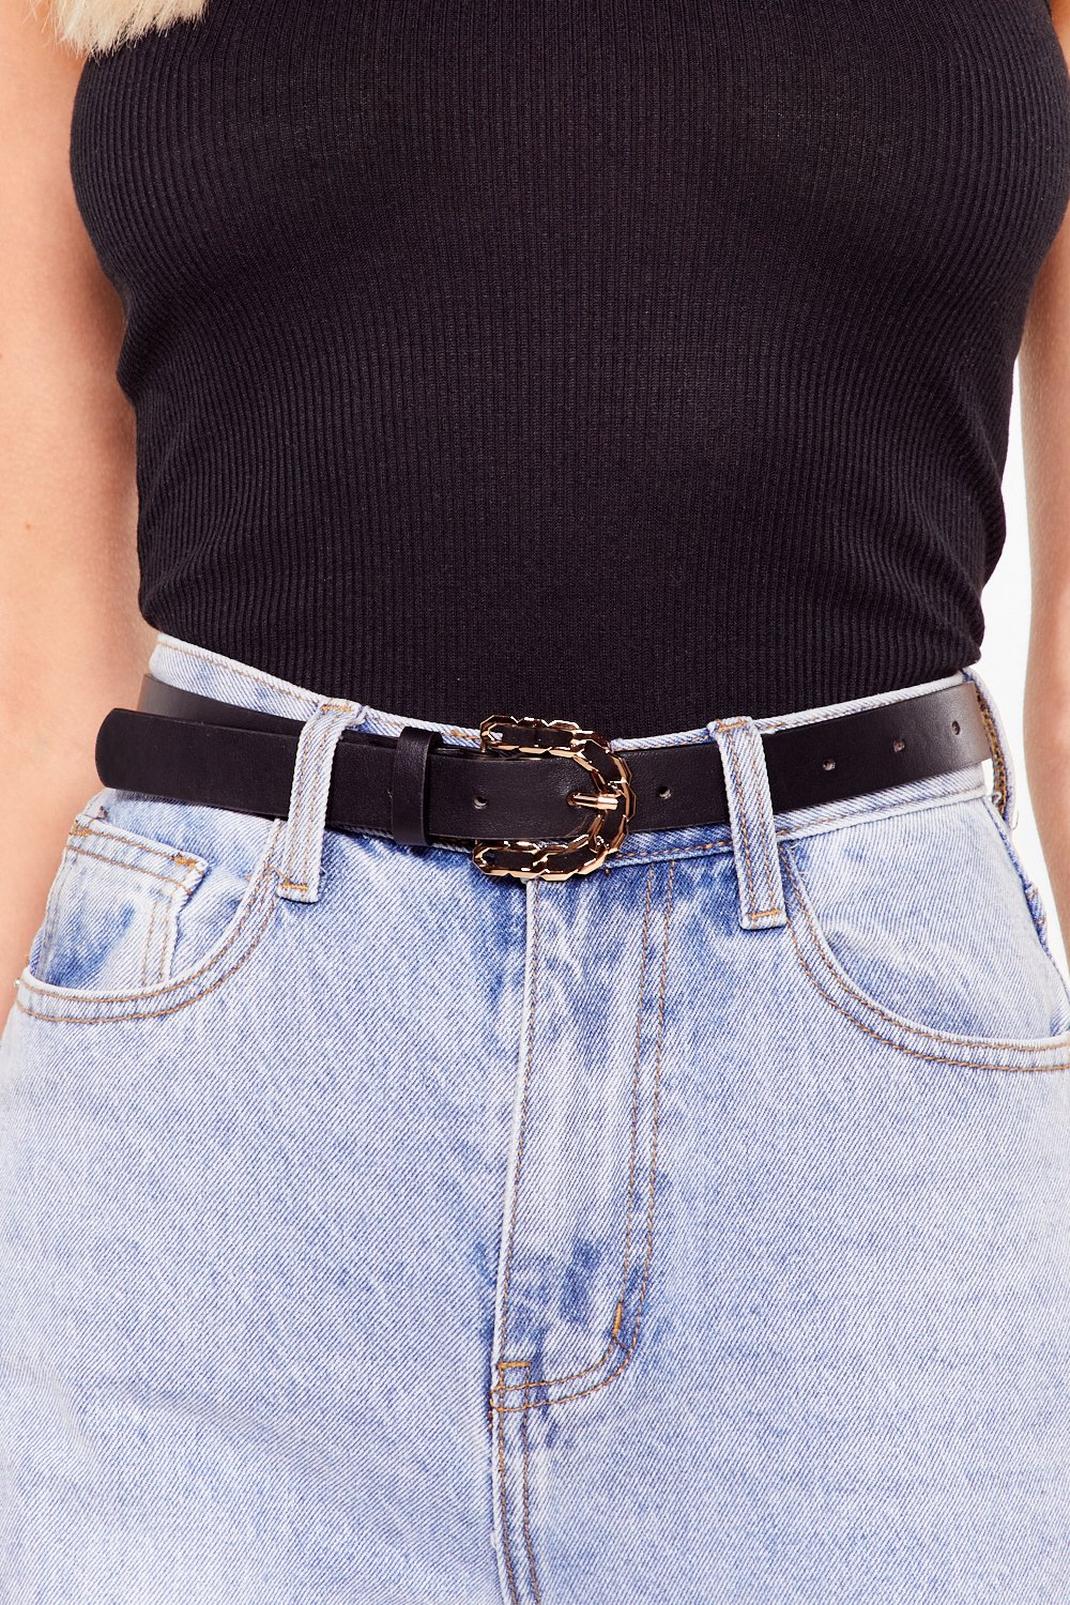 Buckle You Mean Faux Leather Chain Belt | Nasty Gal